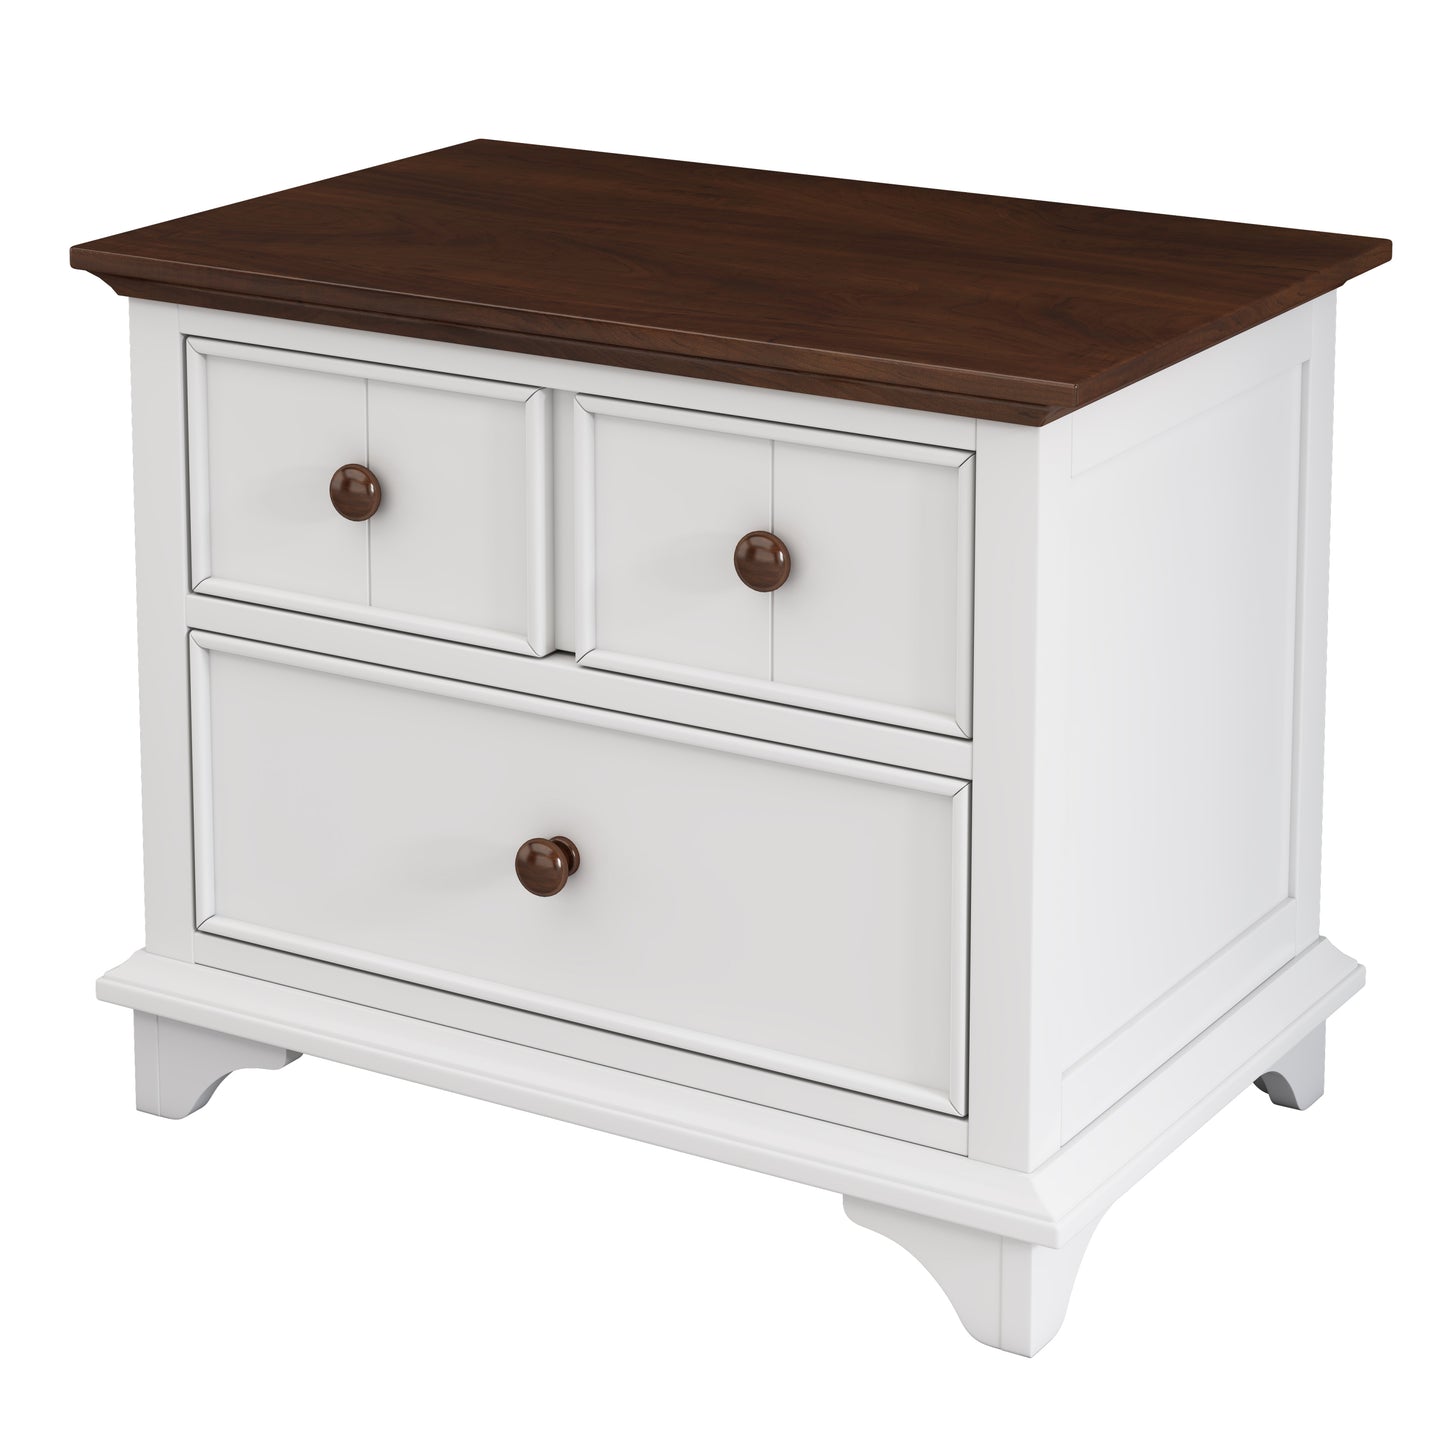 Wooden Captain Two-Drawer Nightstand Kids Night Stand  End Side Table for Bedroom, Living Room, Kids' Room, White+Walnut